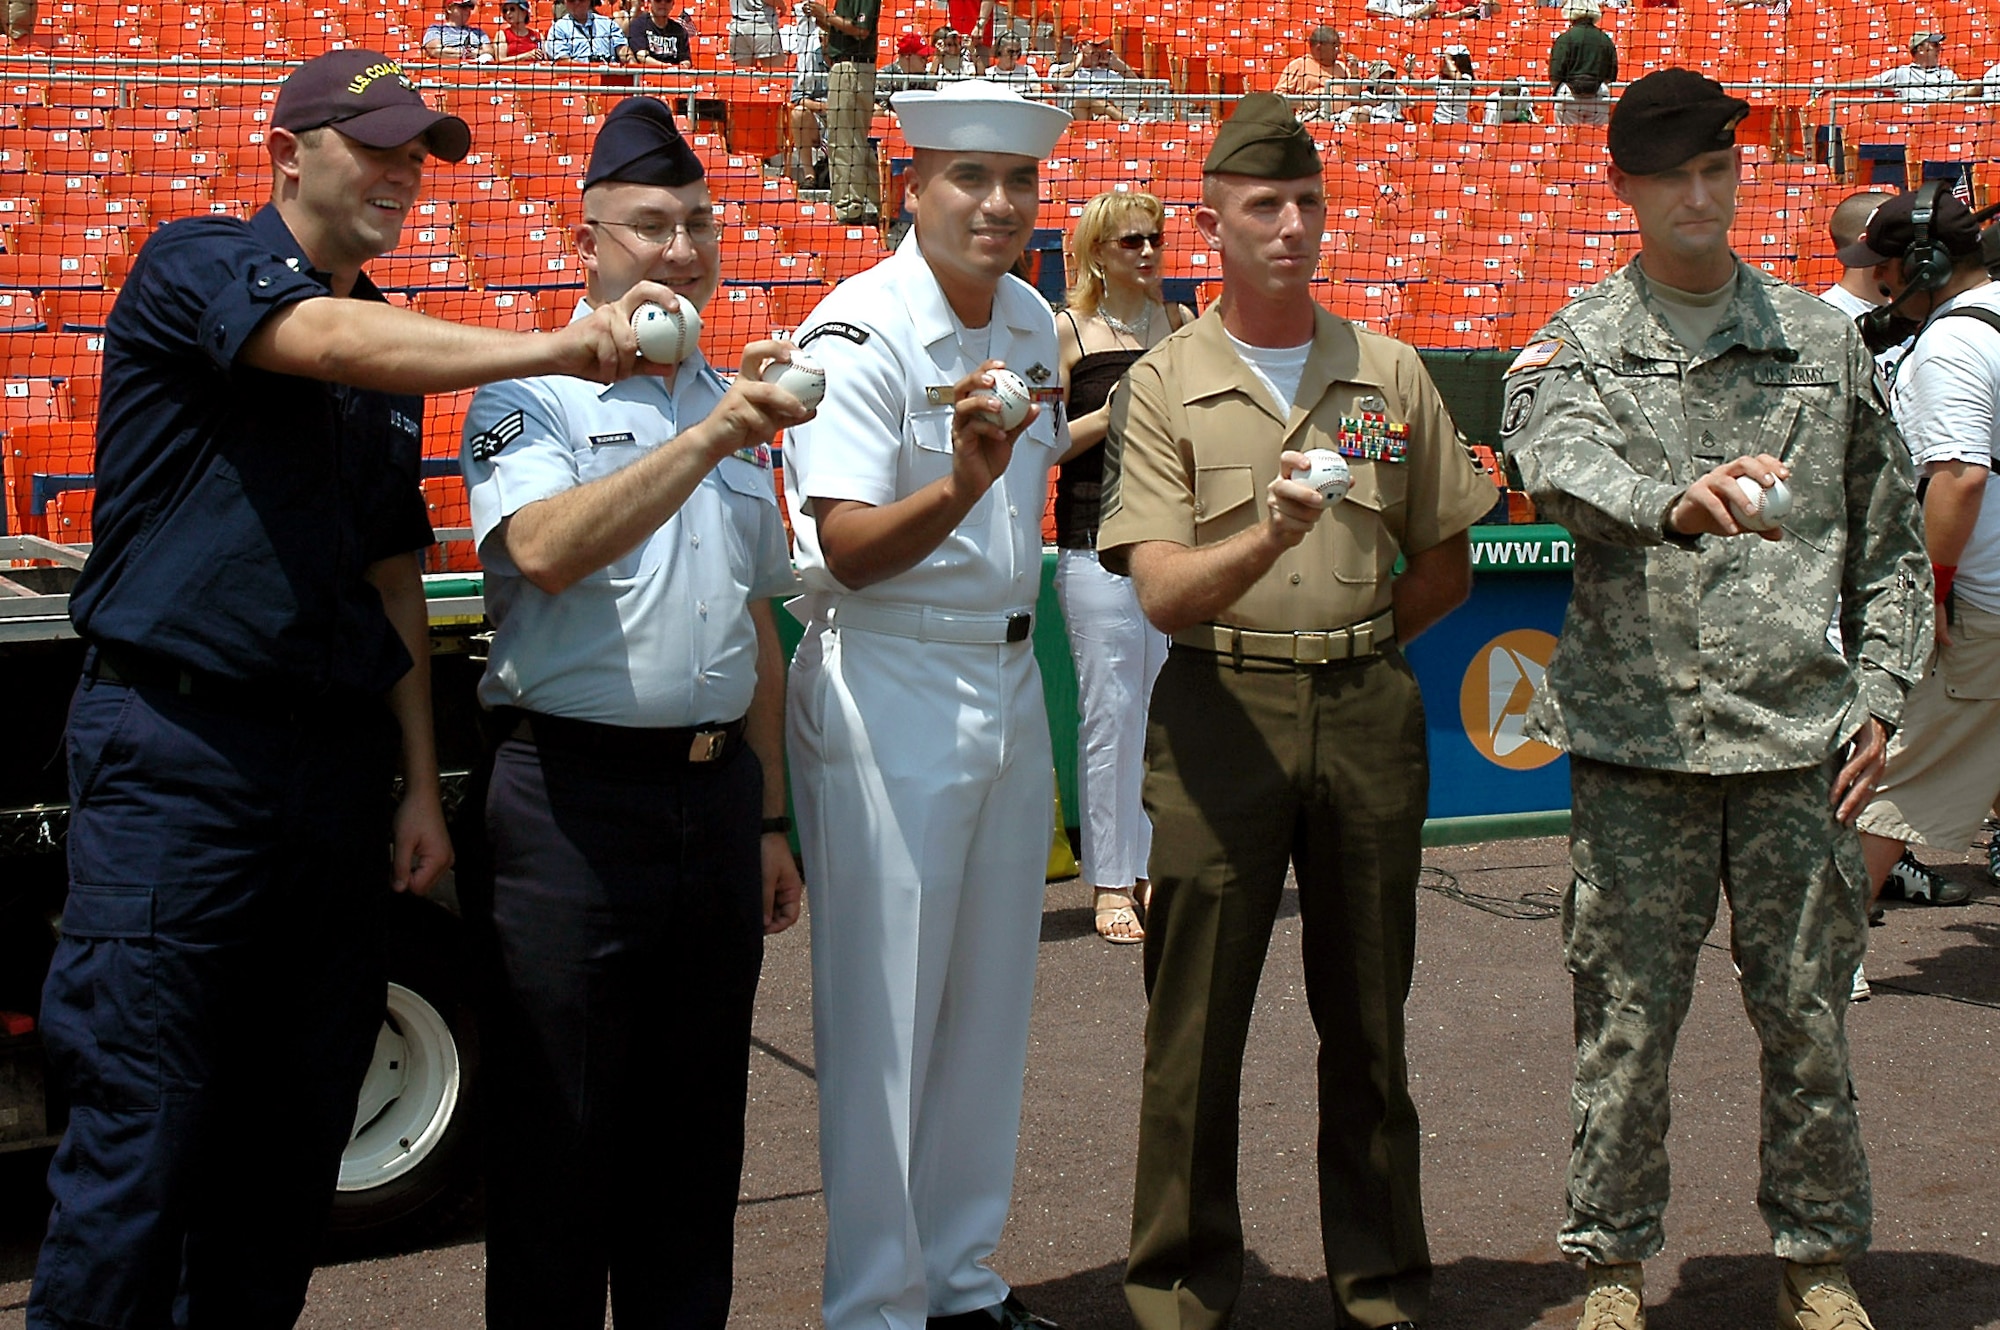 (From left) Coast Guard Petty Officer 2nd Class Seth Cockram, Headquarters U.S. Coast Guard; Senior Airman Joseph Buzanowski, Detachment 16, Air Force News Agency, Washington, D.C.; Navy Hospital Corpsman 2nd Class Roberto Medrano, National Naval Medical Center, Bethesda, Md.; Marine Corps First Sgt. Bobby Barnett, Henderson Hall Company, Washington, D.C.; and Army Staff Sgt. Jody Belzer, 289th Military Police Company, Fort Meyer, Va., were all given the opportunity to throw out a ceremonial "first pitch" before the Washington Nationals game against the Tampa Bay Devil Rays on Sunday, July 2. The event was part of the July Fourth weekend's "Military Appreciation Day" activities at Robert F. Kennedy Memorial Stadium. (U.S. Air Force photo/Staff Sgt. C. Todd Lopez)